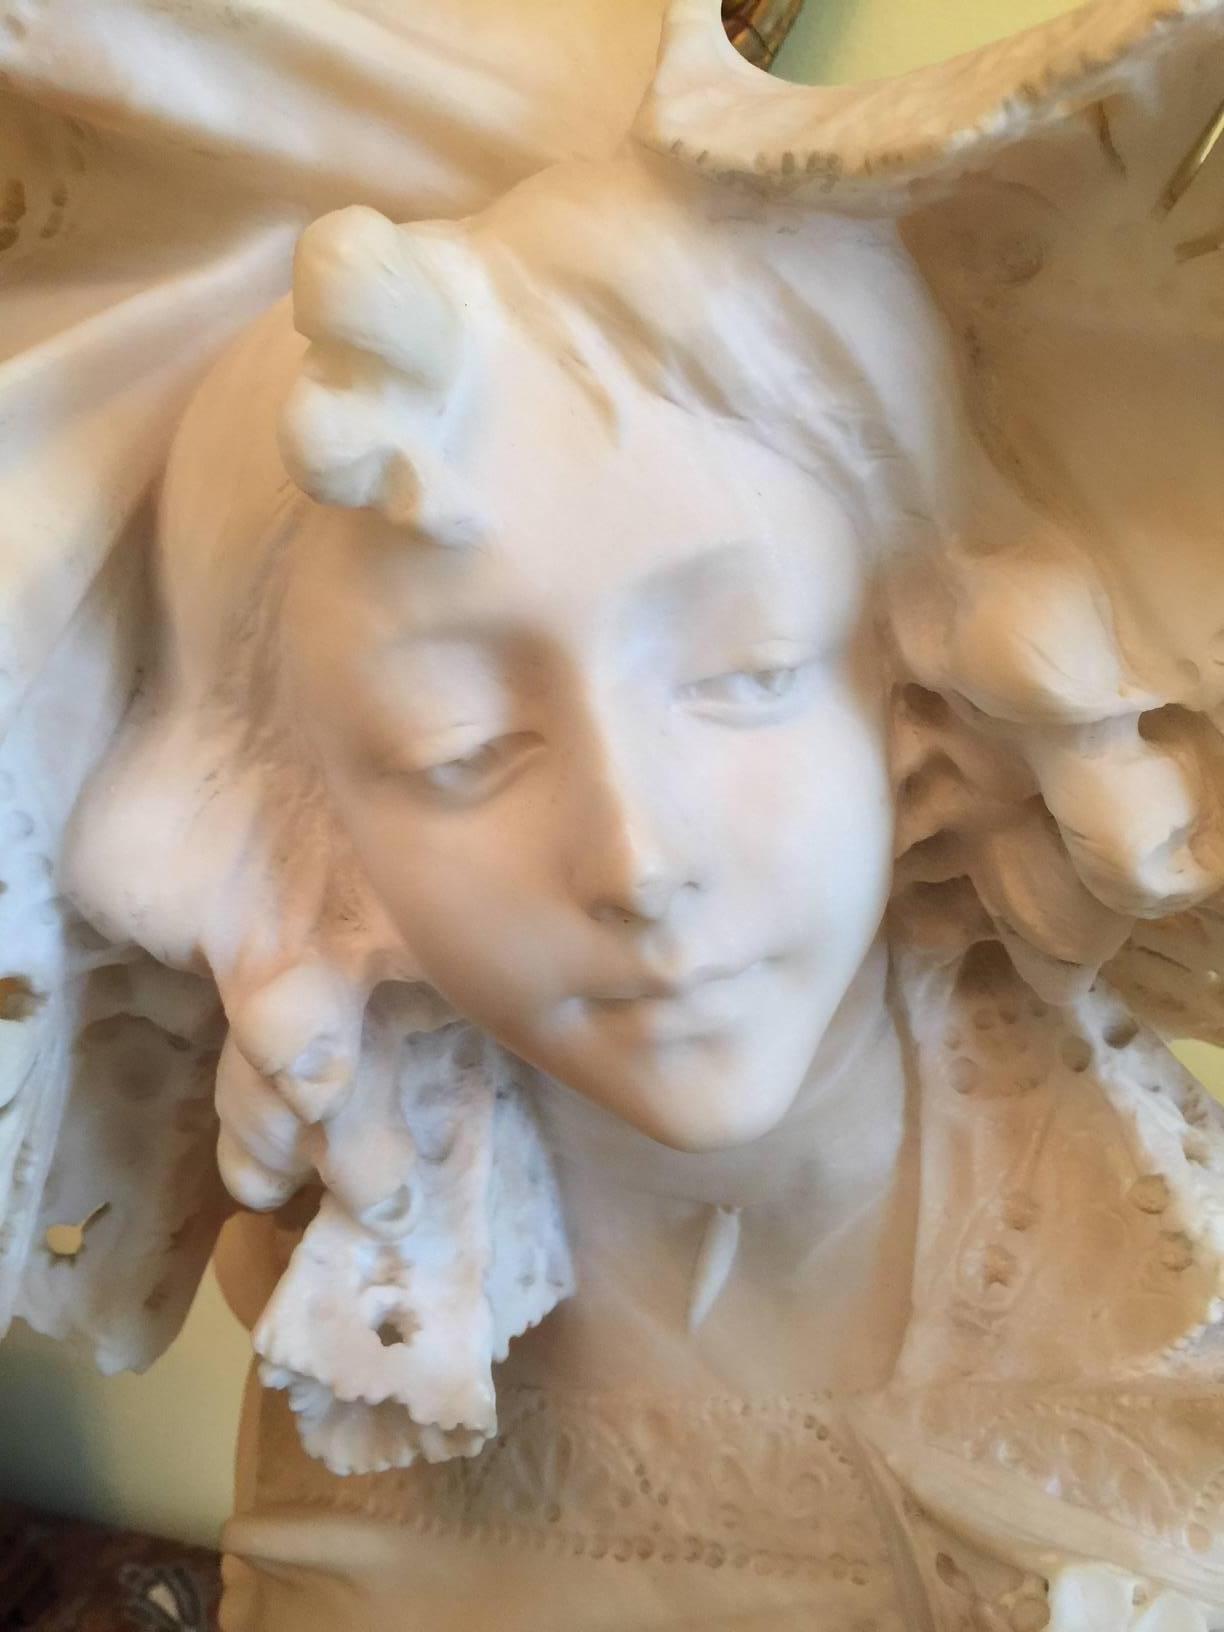 Exceptional hand carved Art Nouveau bust of a young woman. Her elaborate hat framing a beautiful face. The style clothing of the late 19th century Art Nouveau period. The bust rests on a round marble pedestal base.